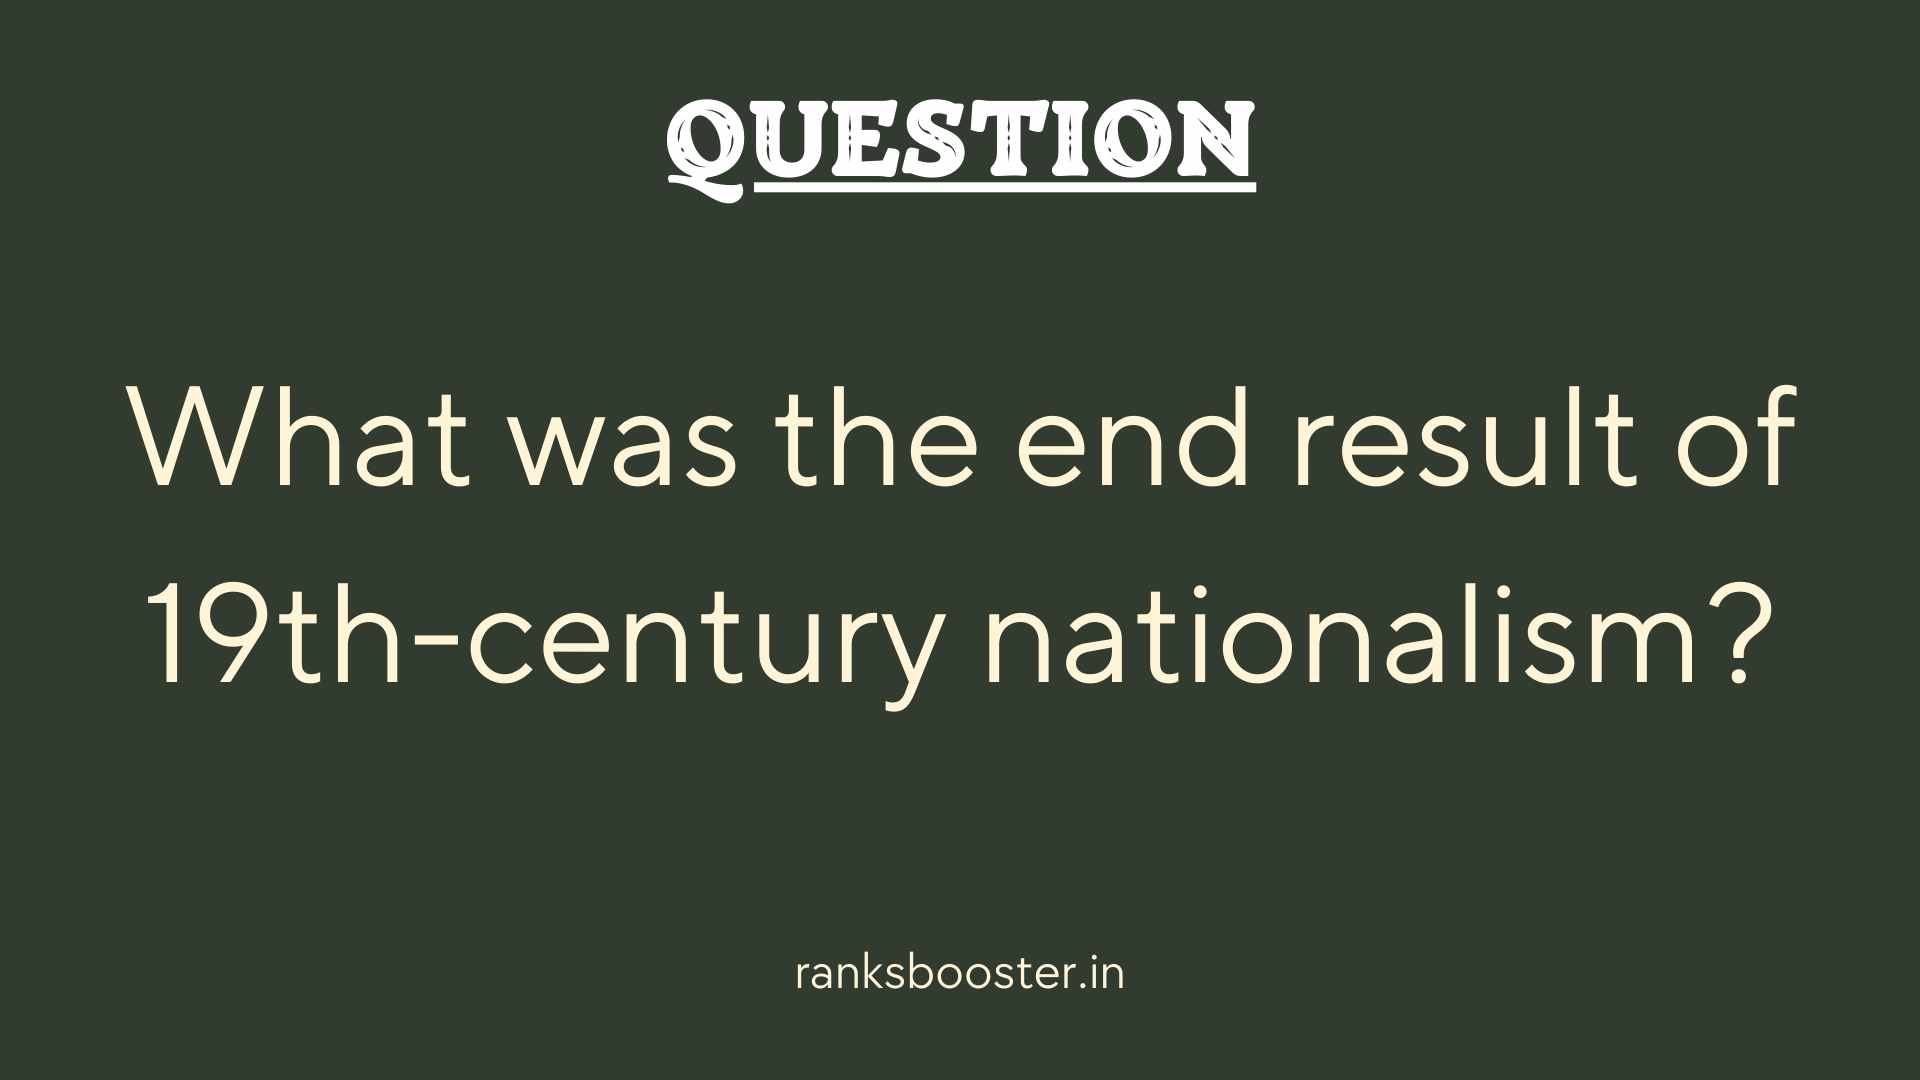 Question: What was the end result of 19th-century nationalism?